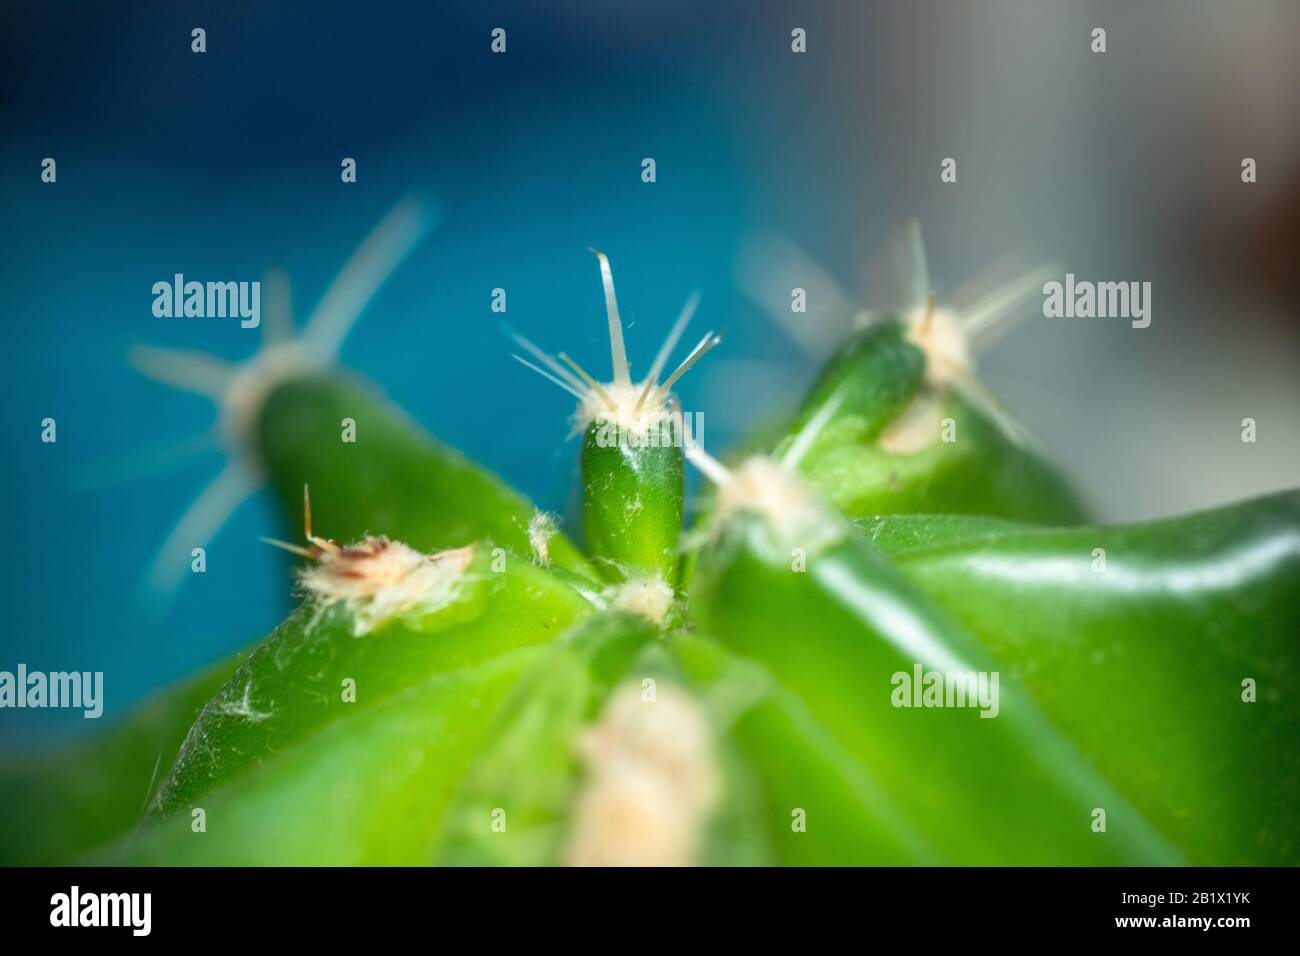 Small green cactus with bent needles on a blue background. Unpretentious plant. Cactus Care and Transplant Stock Photo